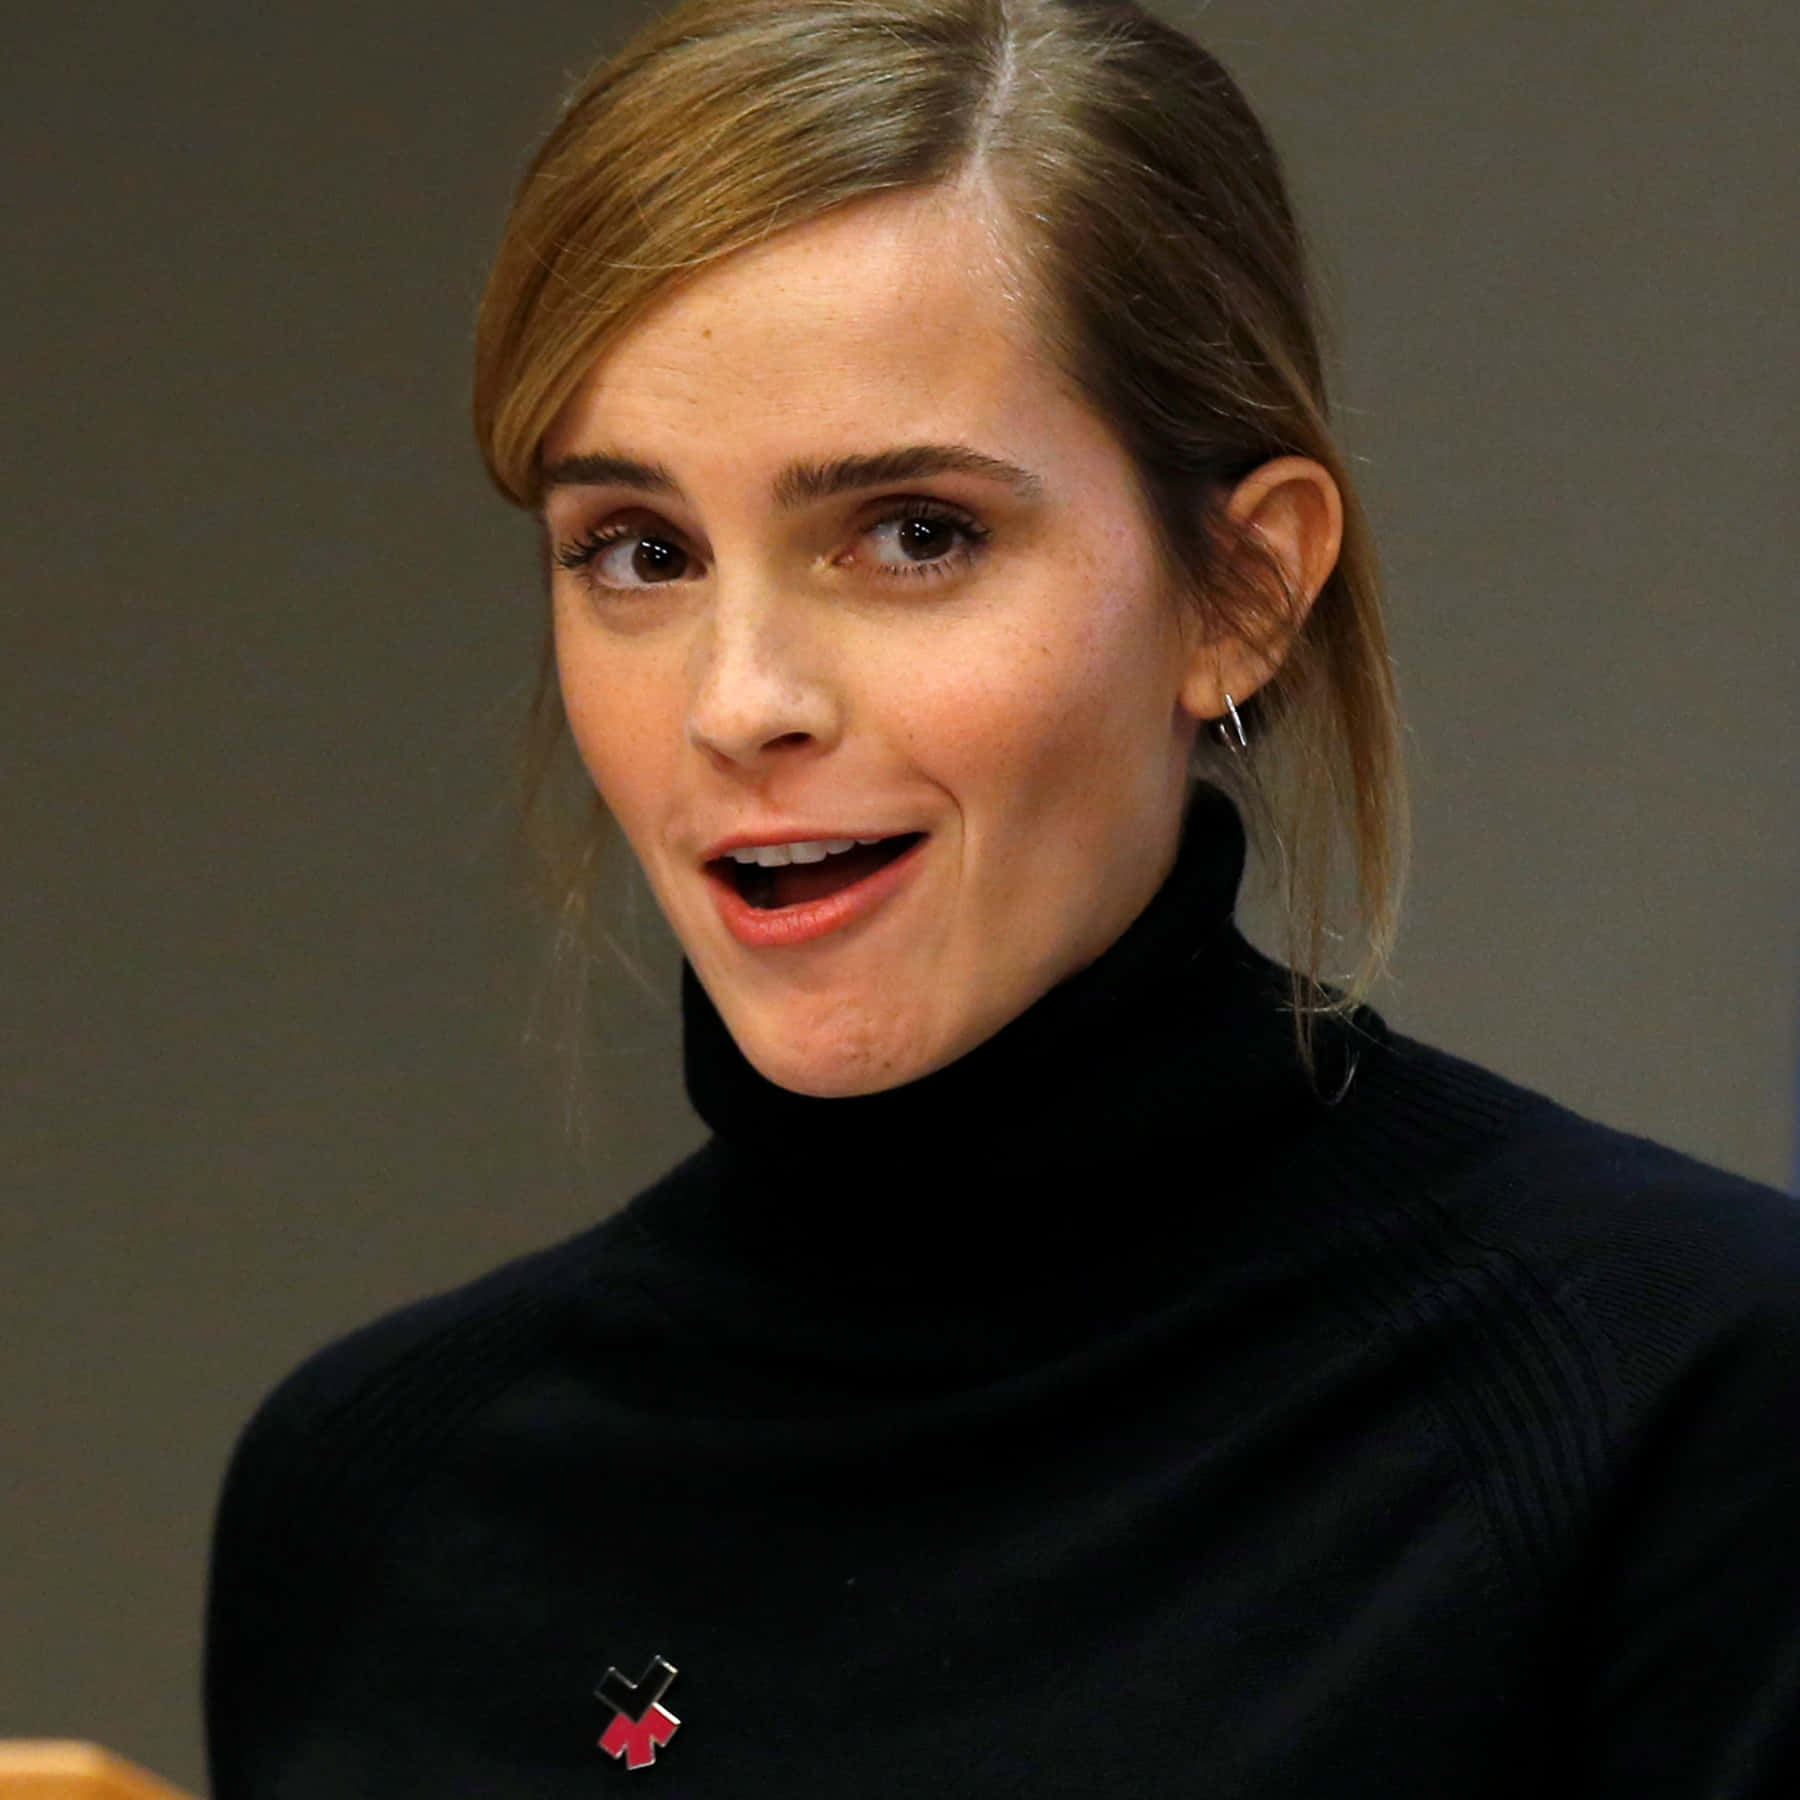 Emma Watson lights up the stage with her charm and grace